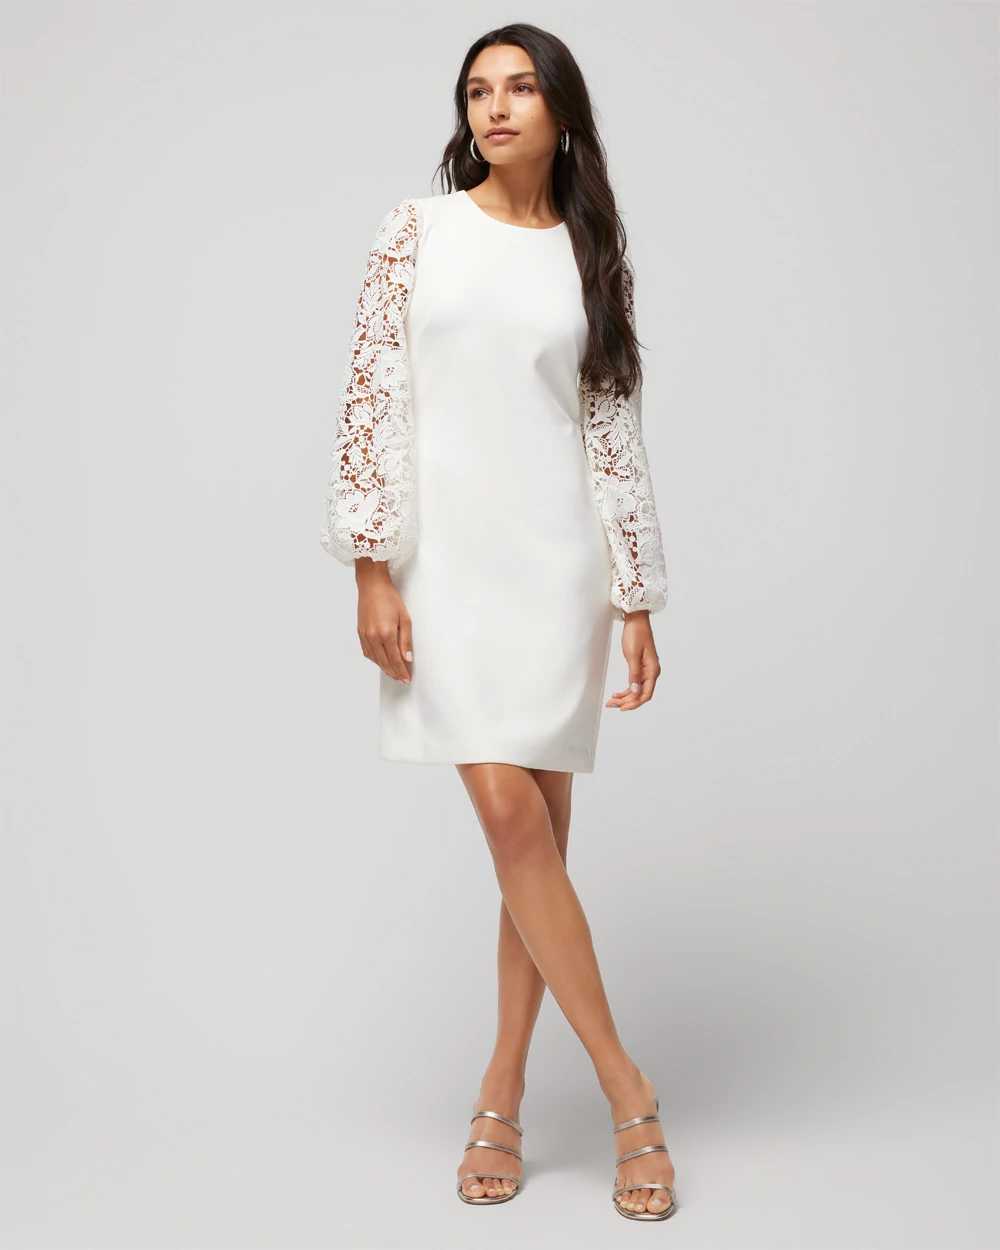 Petite Lace Sleeve Shift Dress click to view larger image.